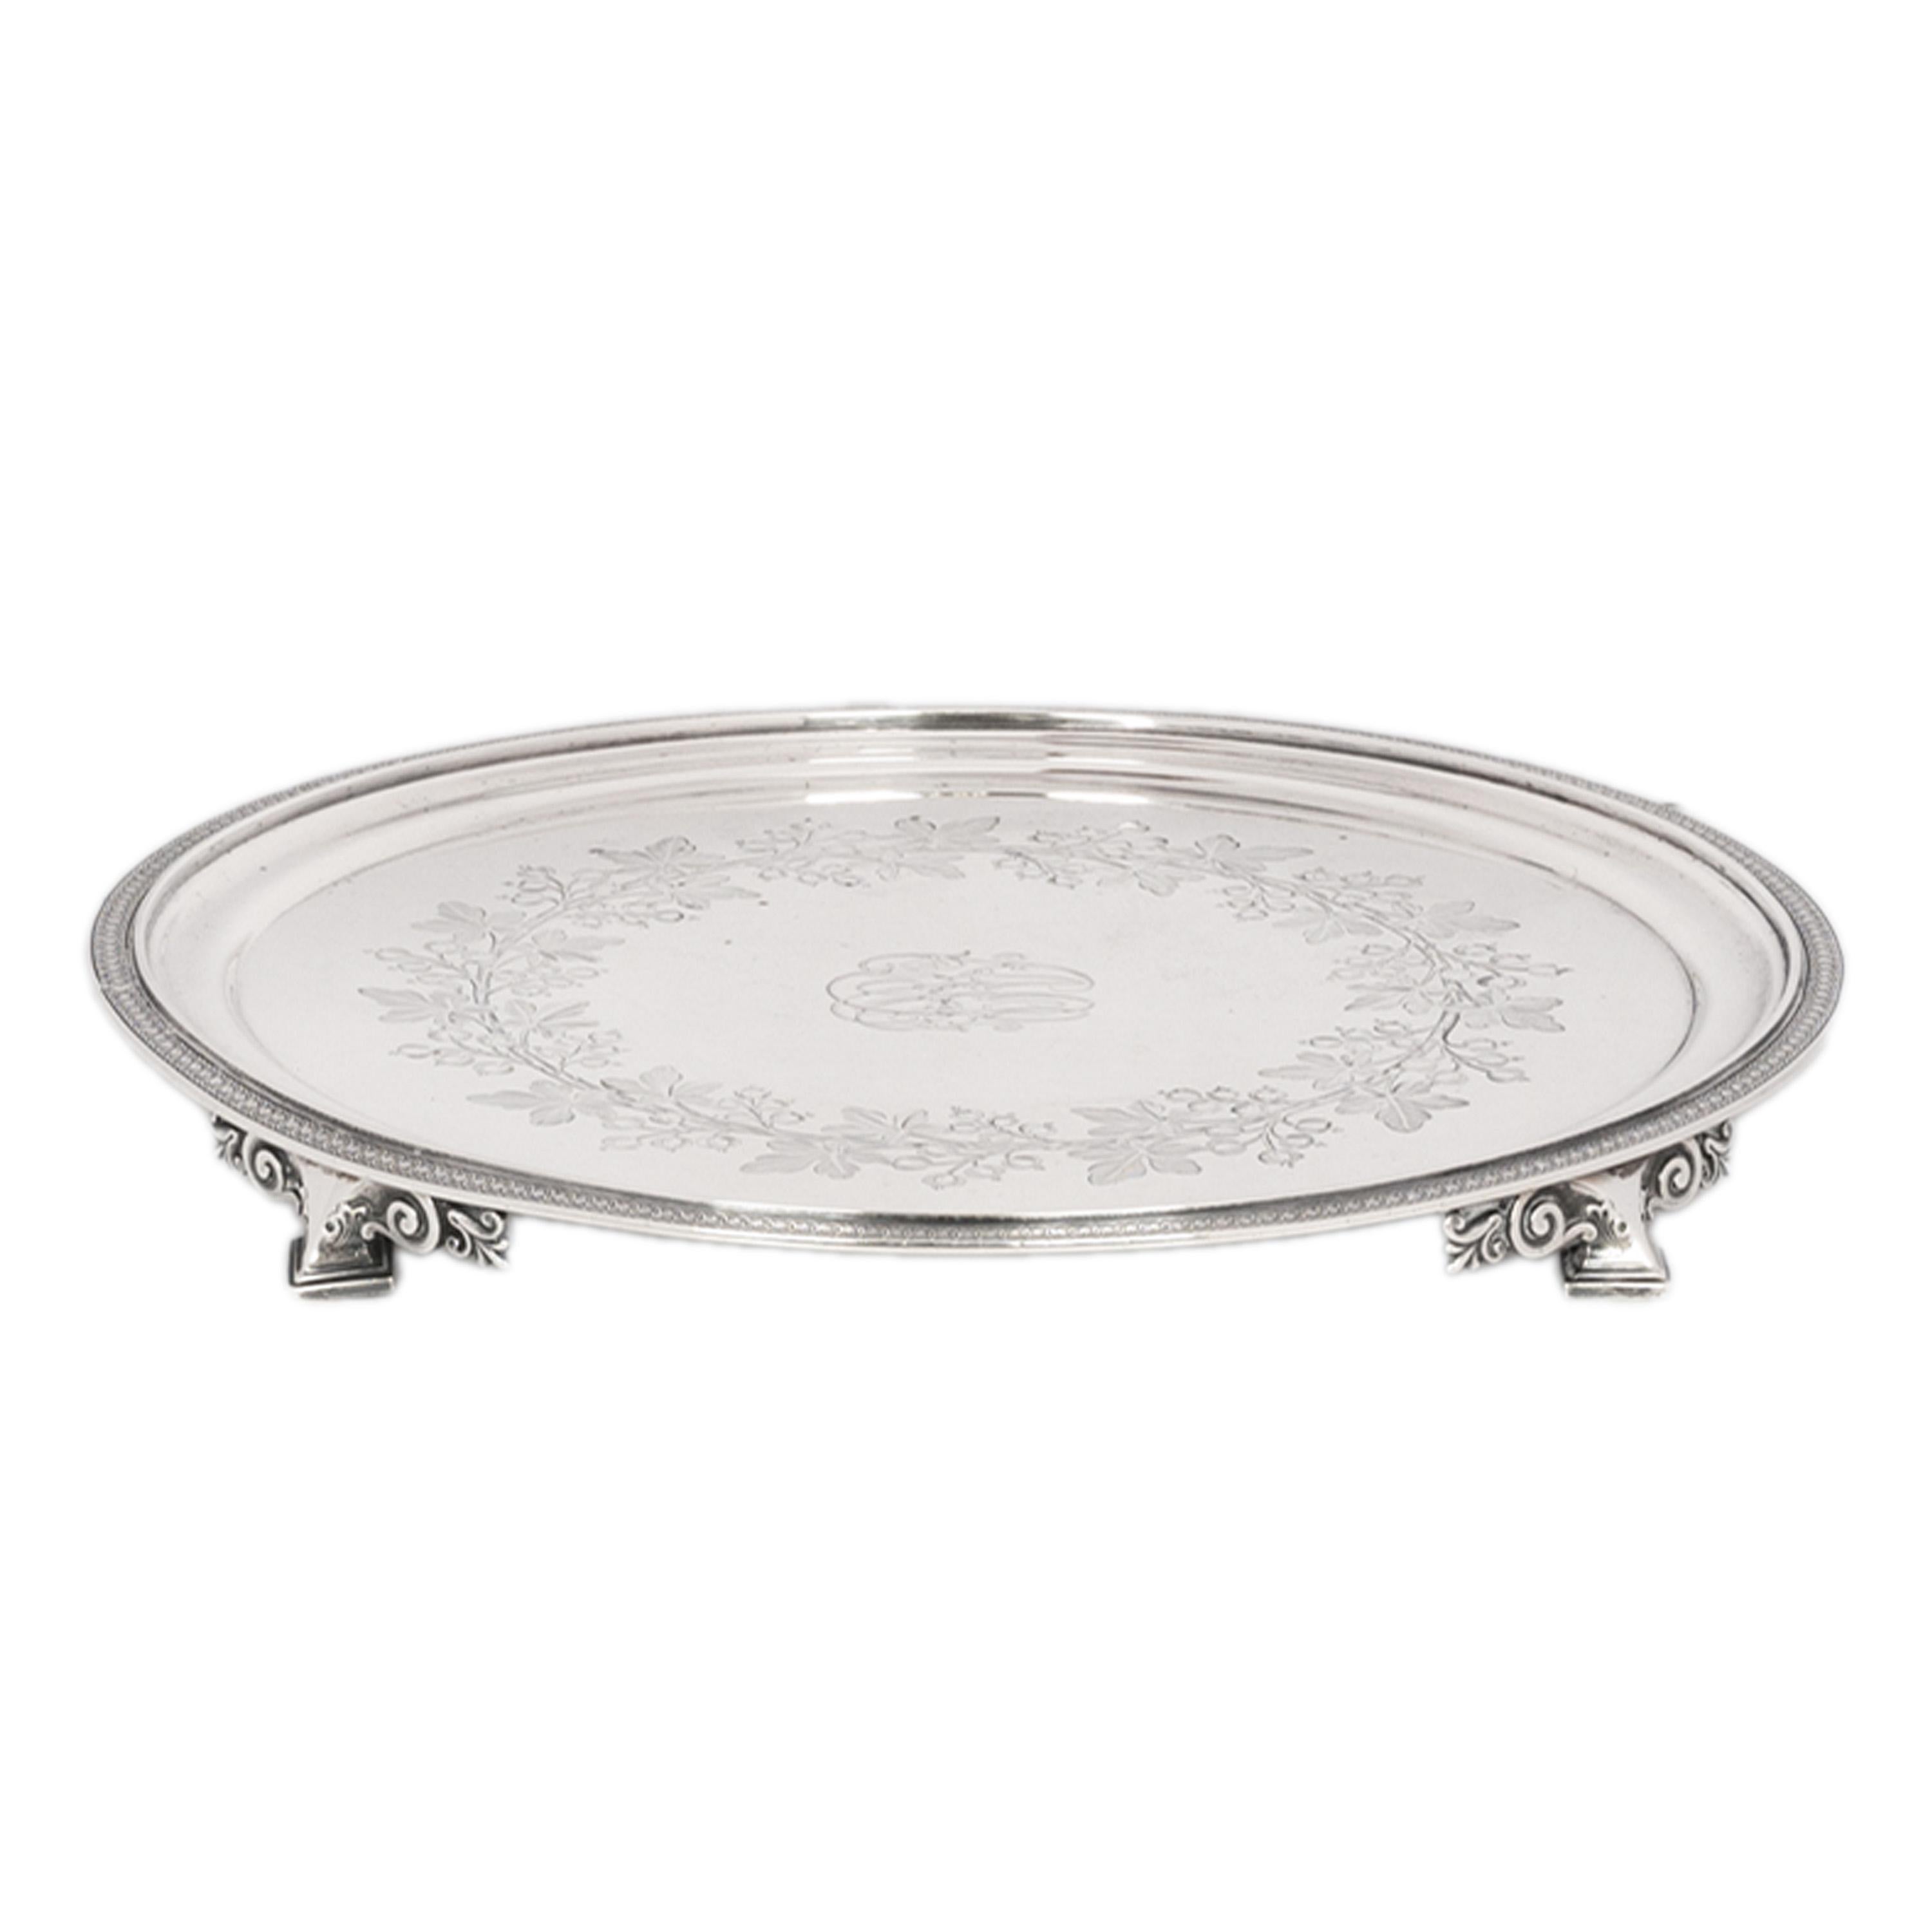 Antique Engraved Sterling Silver Tiffany & Co Footed Salver Tray New York 1870 For Sale 2